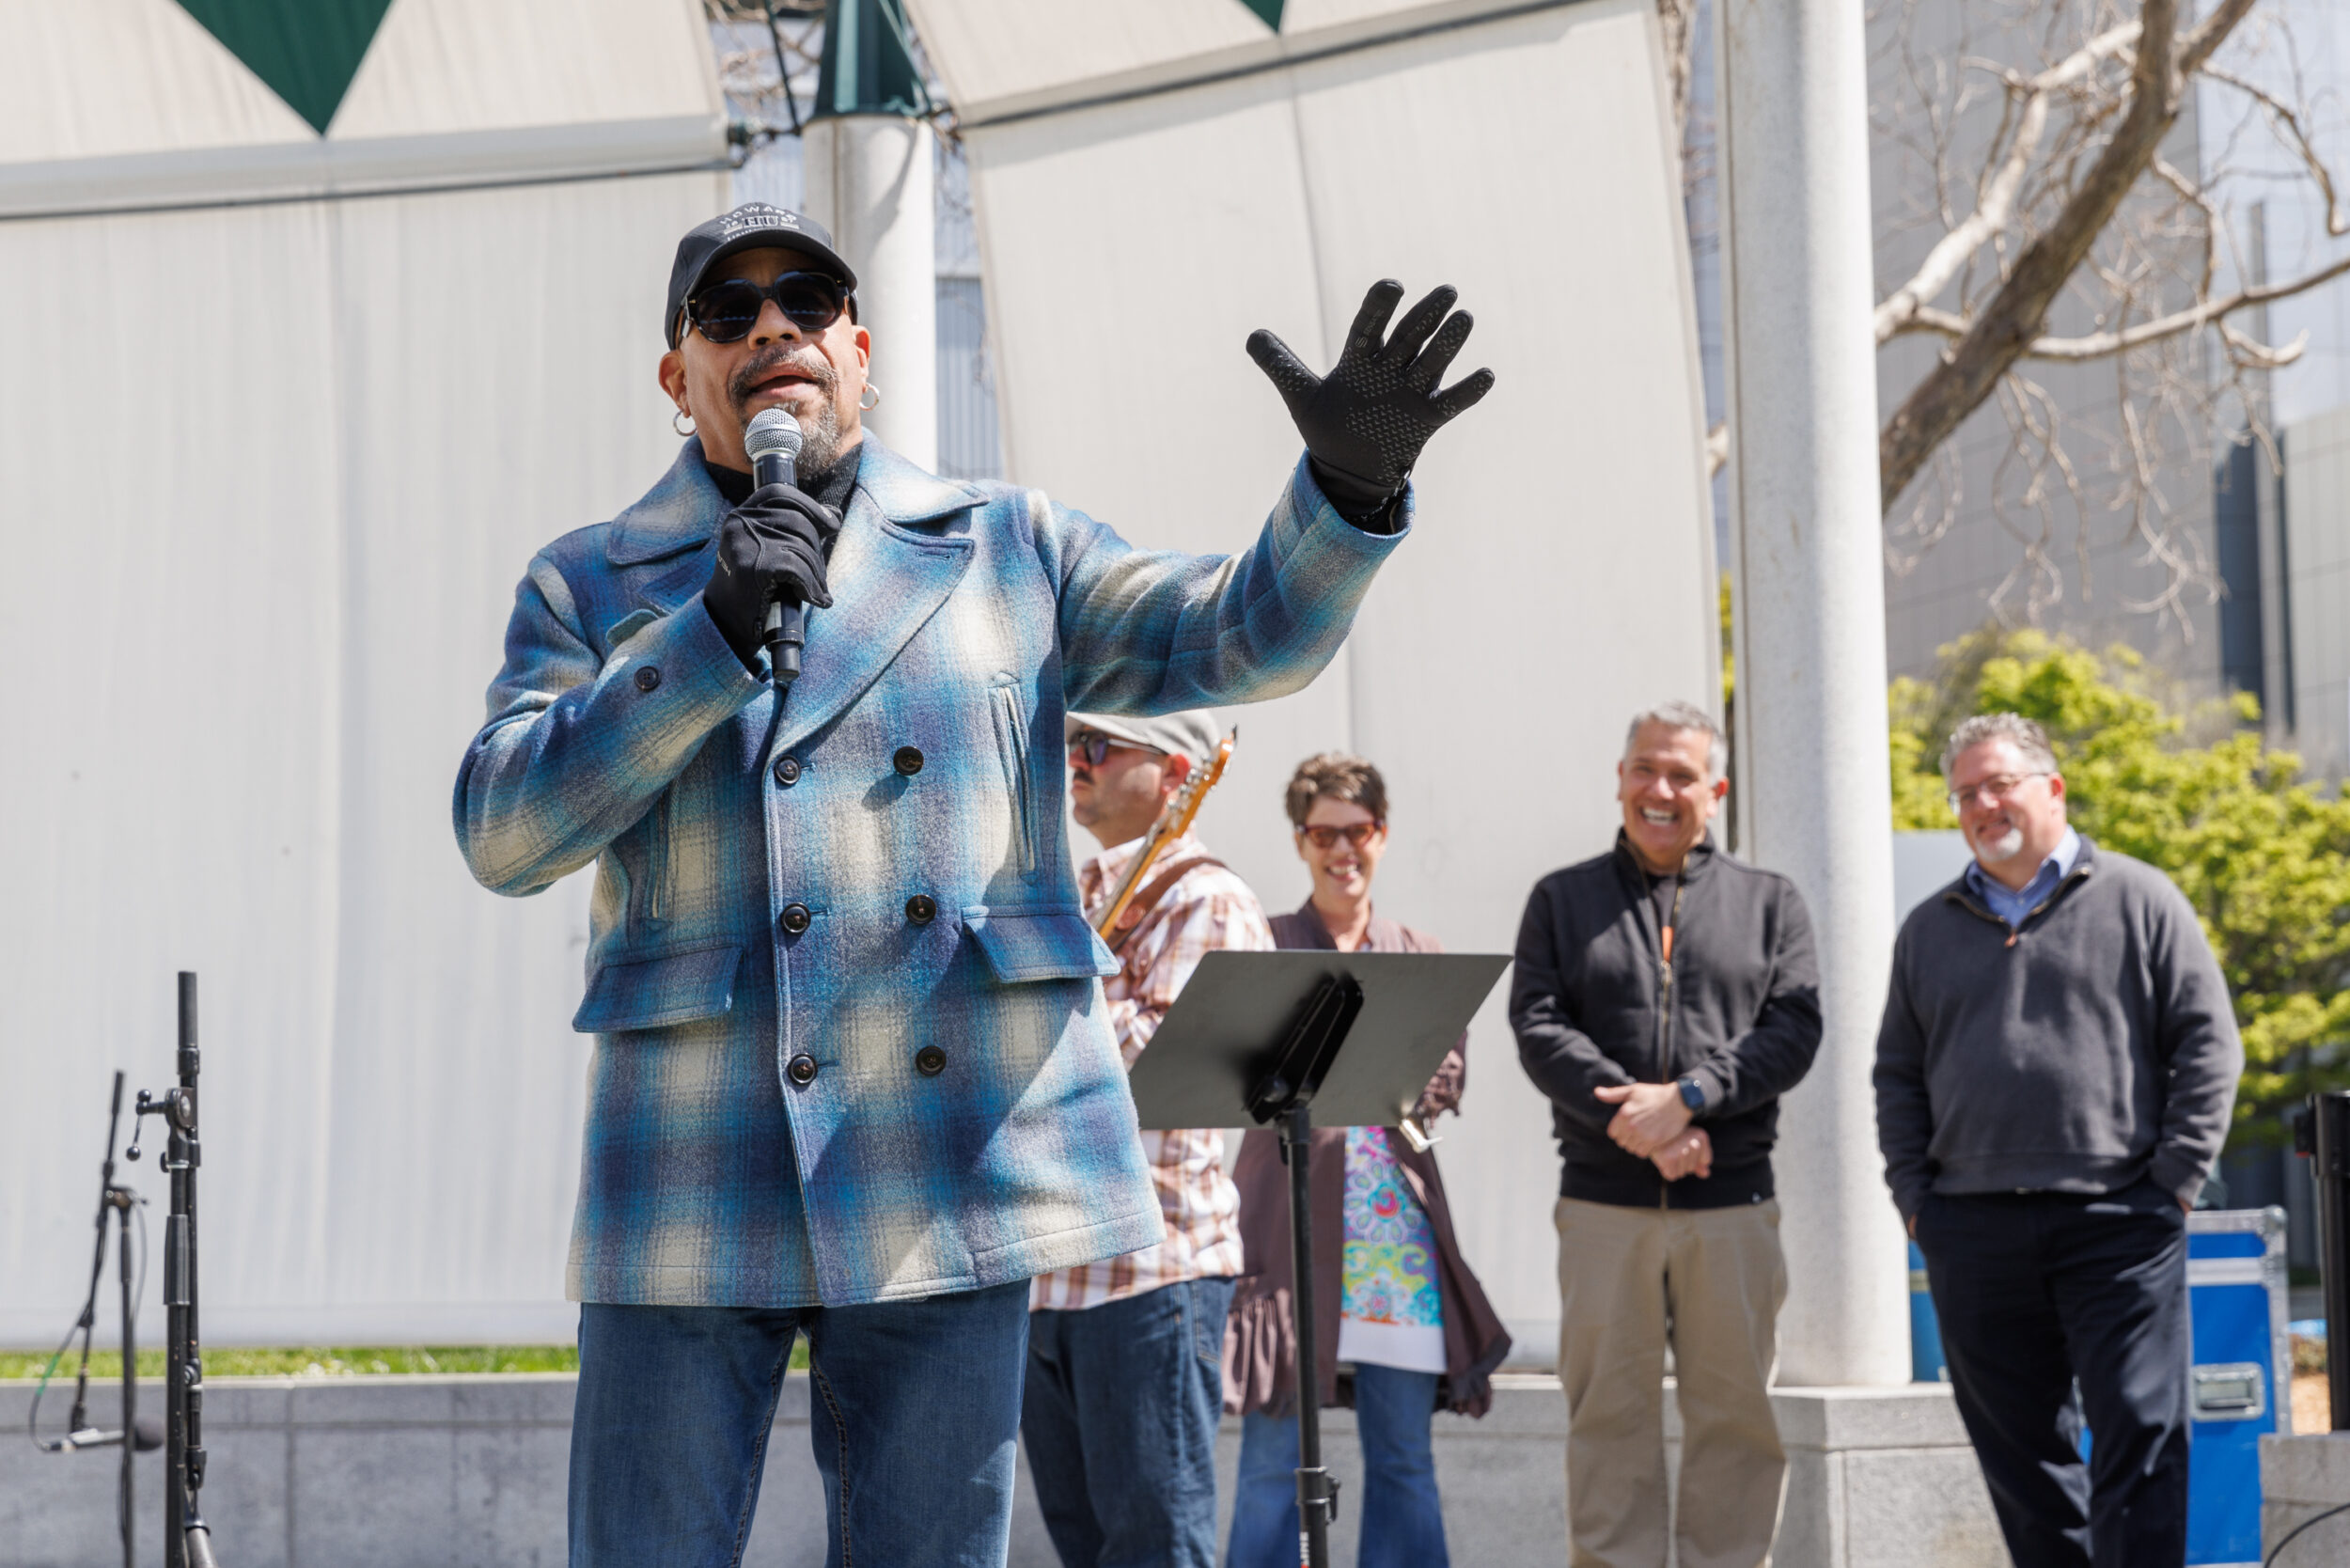 A man in a plaid coat speaks into a mic at an event, raising one hand, with four observers in the background.